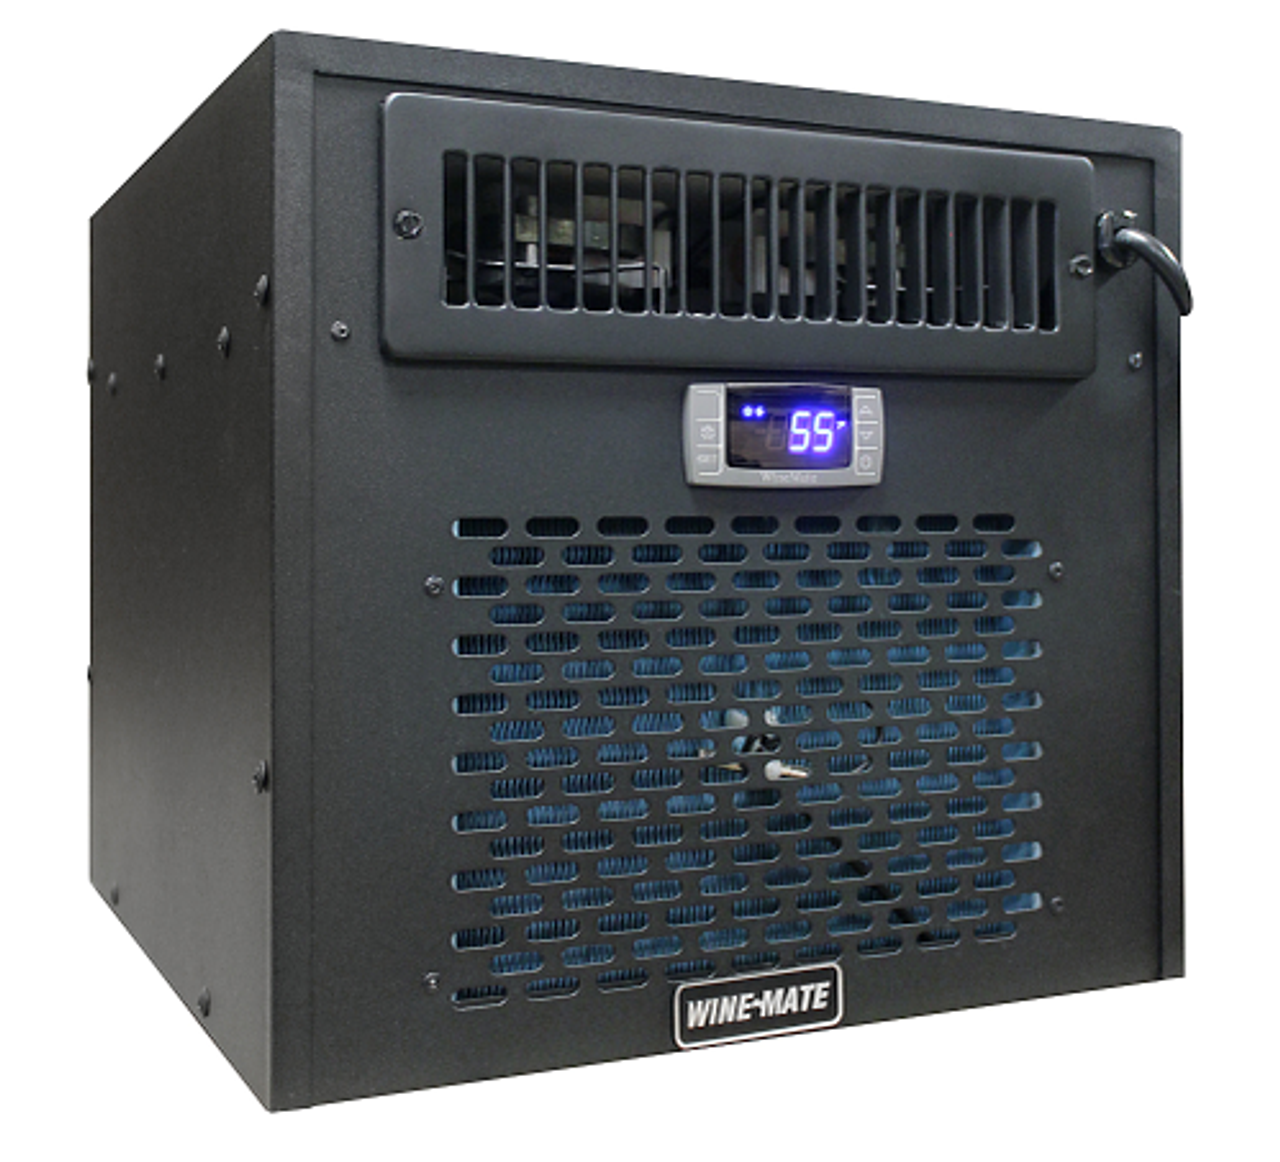 Vinotemp - Wine-Mate 2500HZD Self-Contained Cellar Cooling System